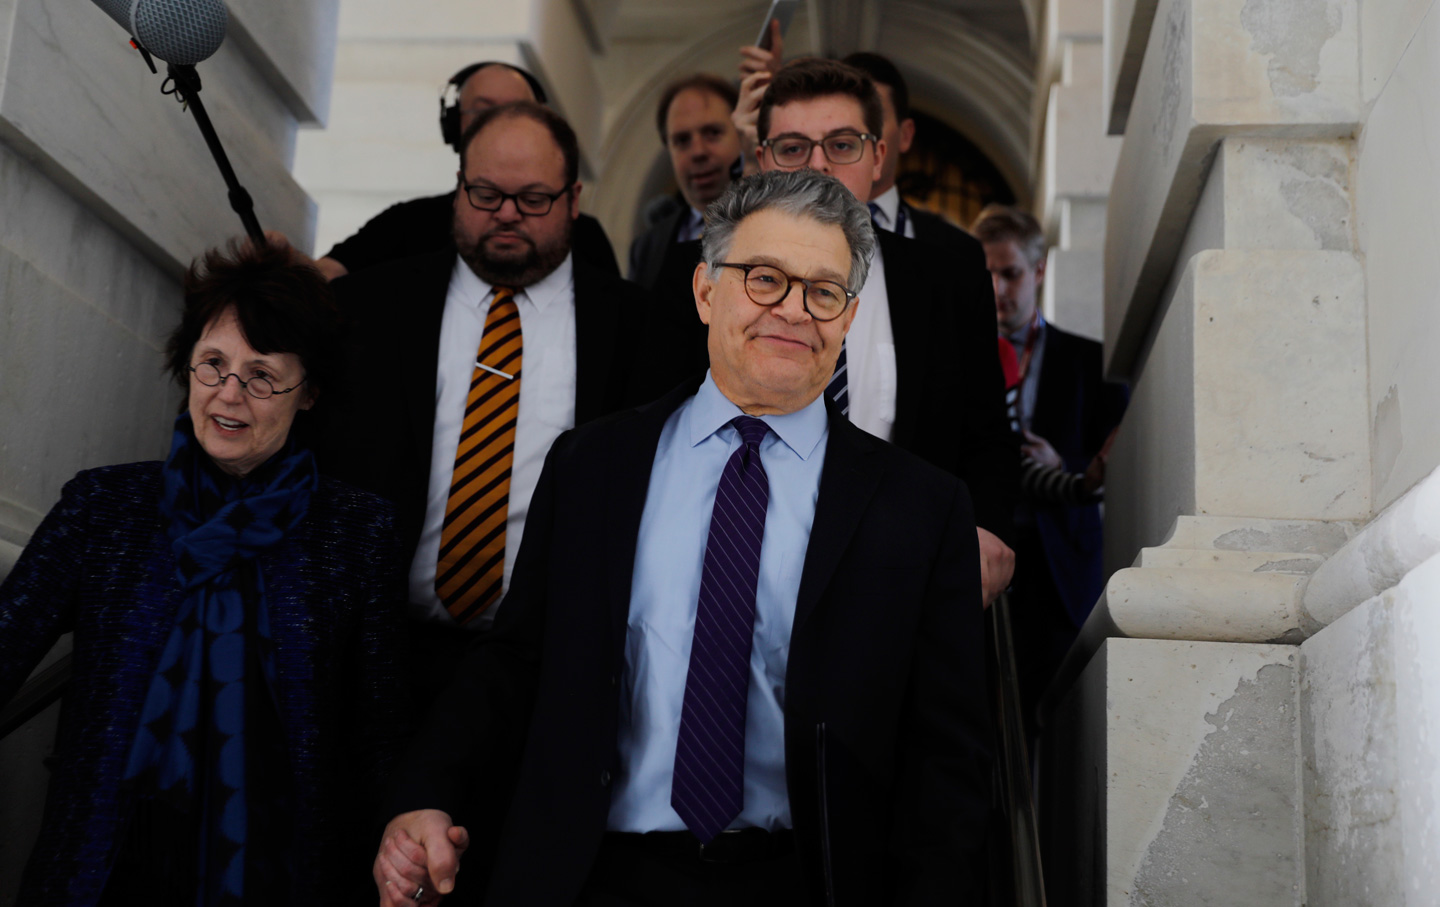 Now That Al Franken Is Gone, Democrats Need to Hold Hearings on Trump